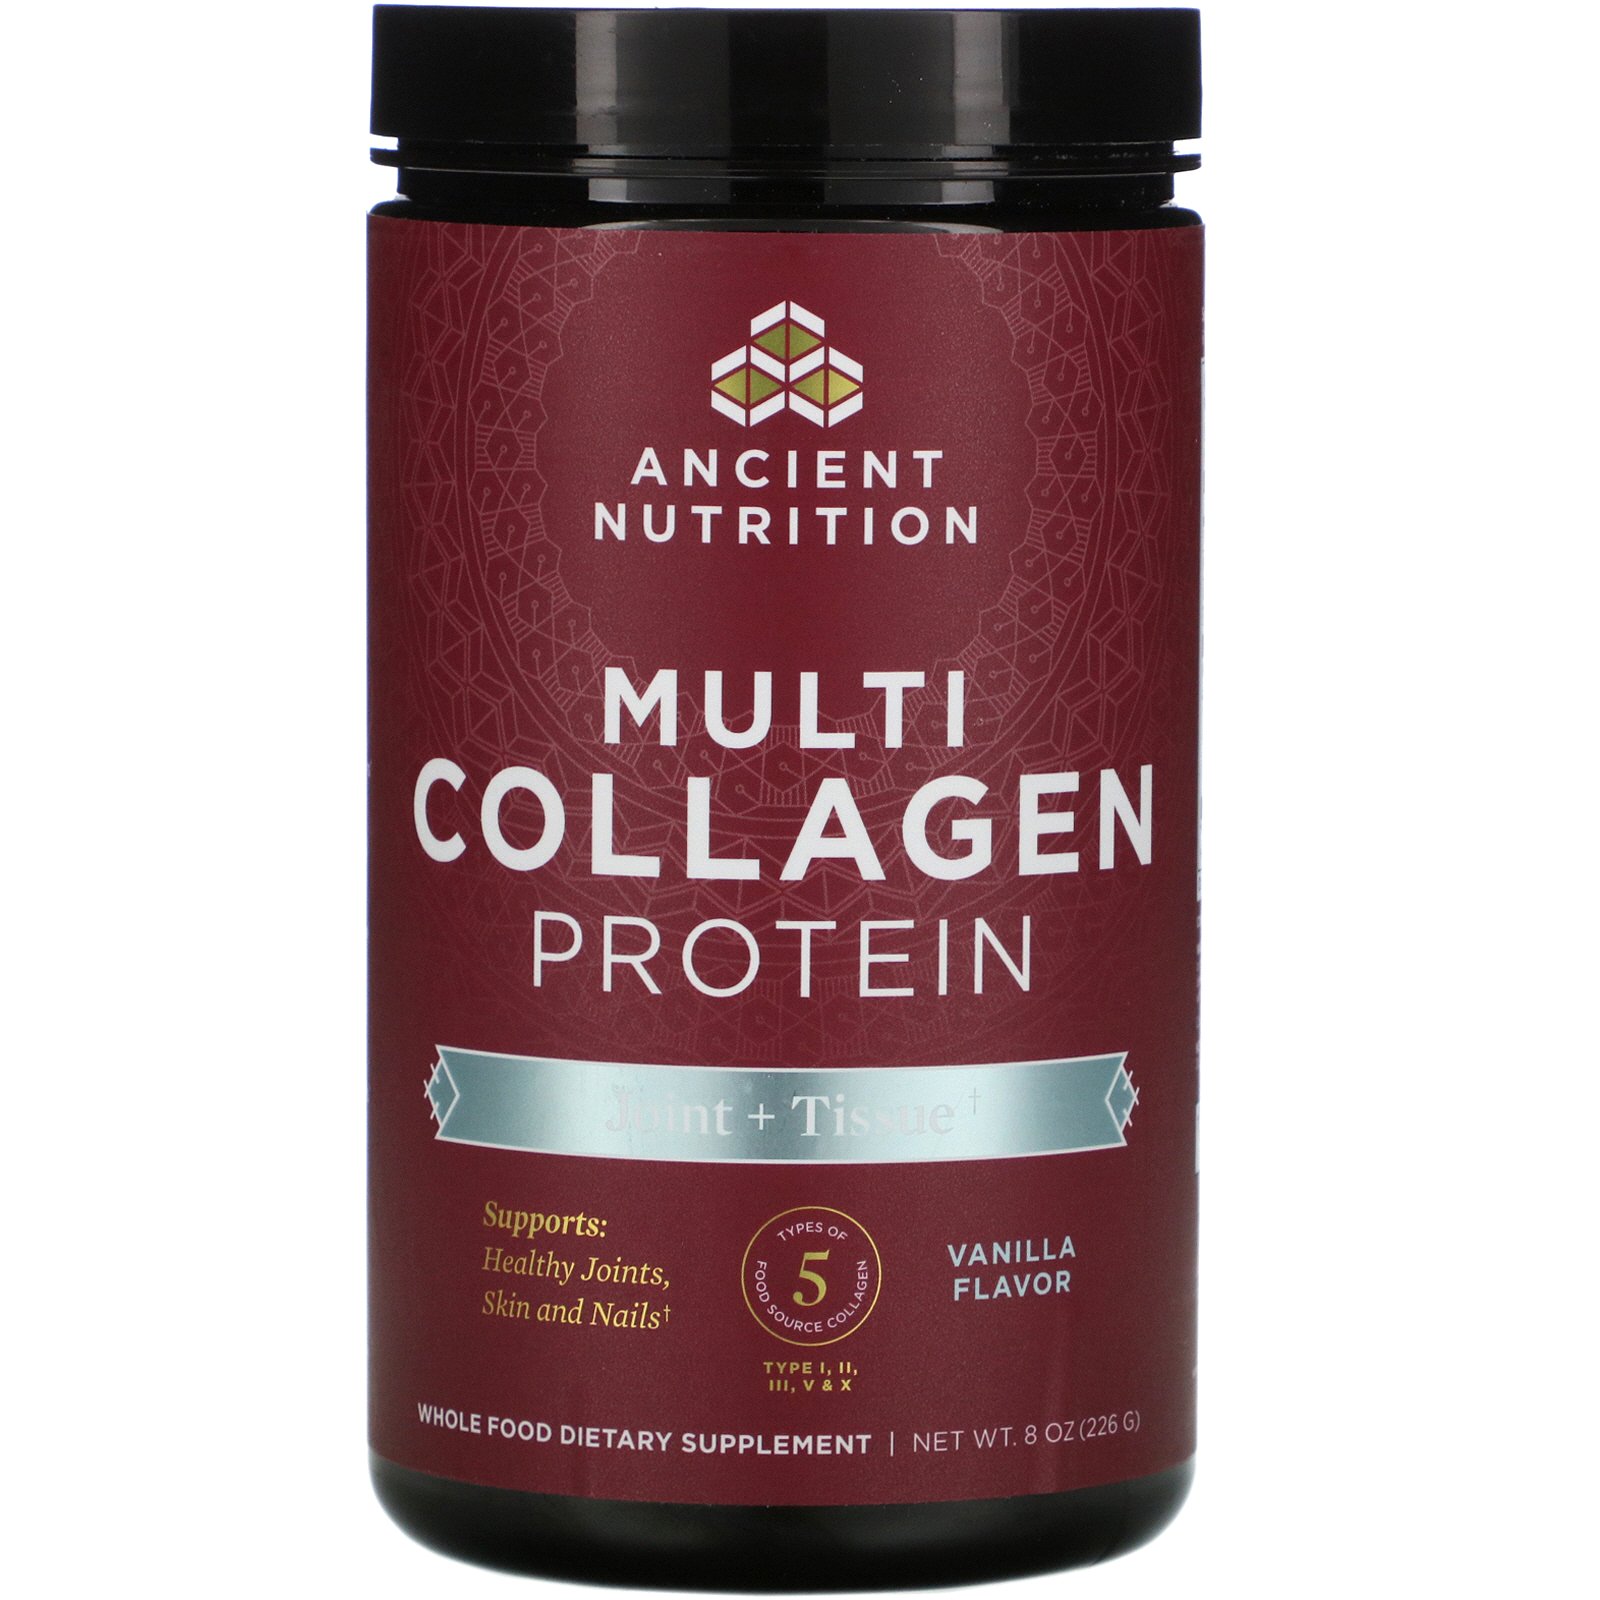 Ancient Nutrition Multi Collagen, Protein Powder - image 1 of 2